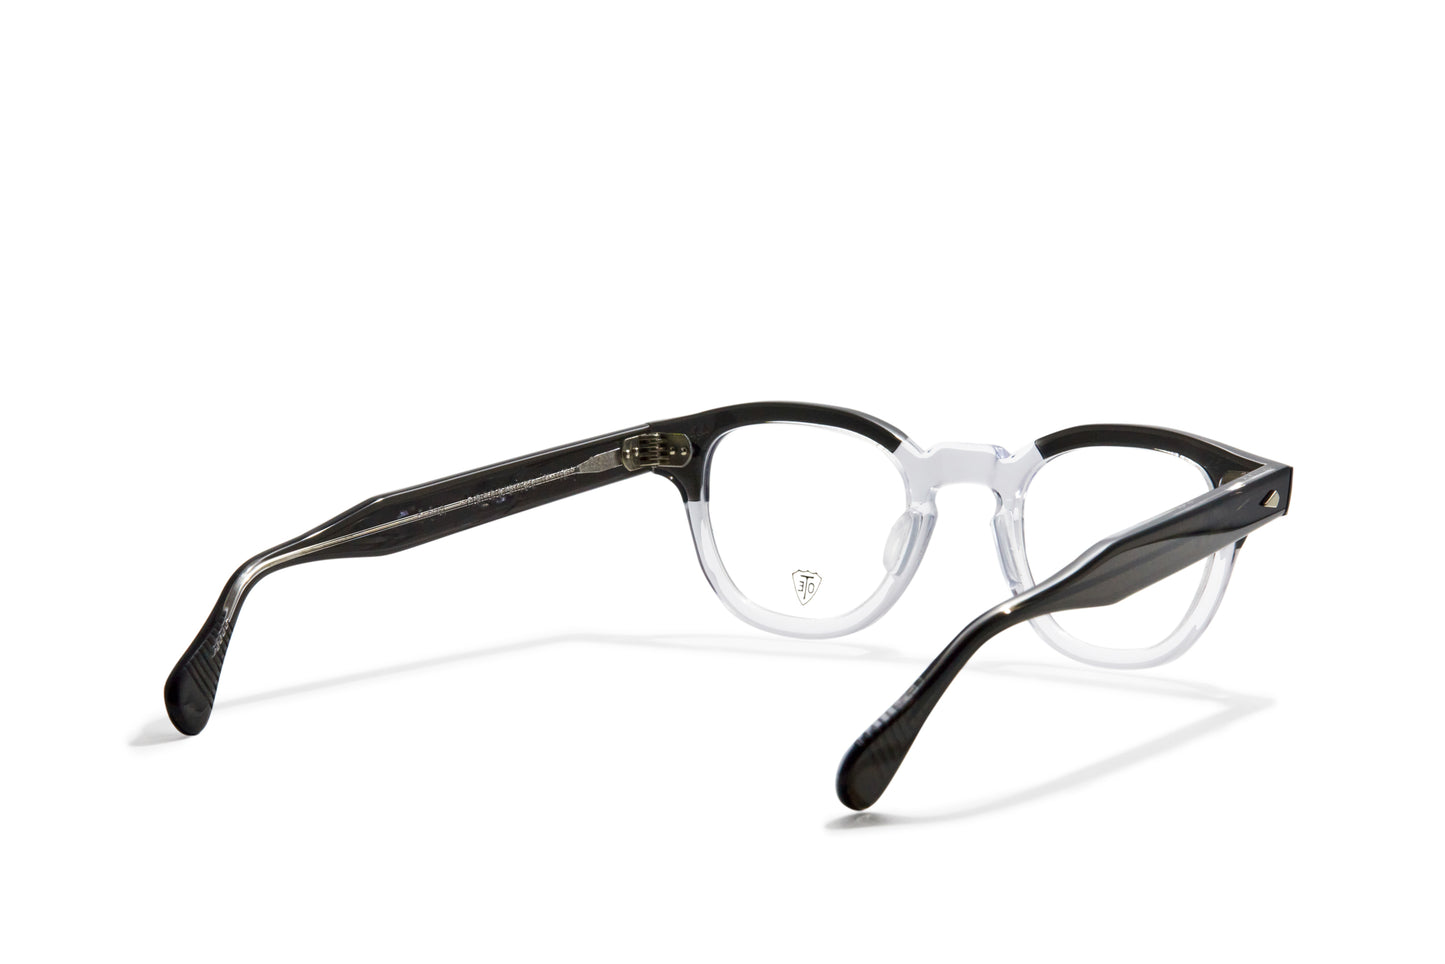 A back view of the smoke grey & clear Arnel Italy frame—the iconic eyeglasses.